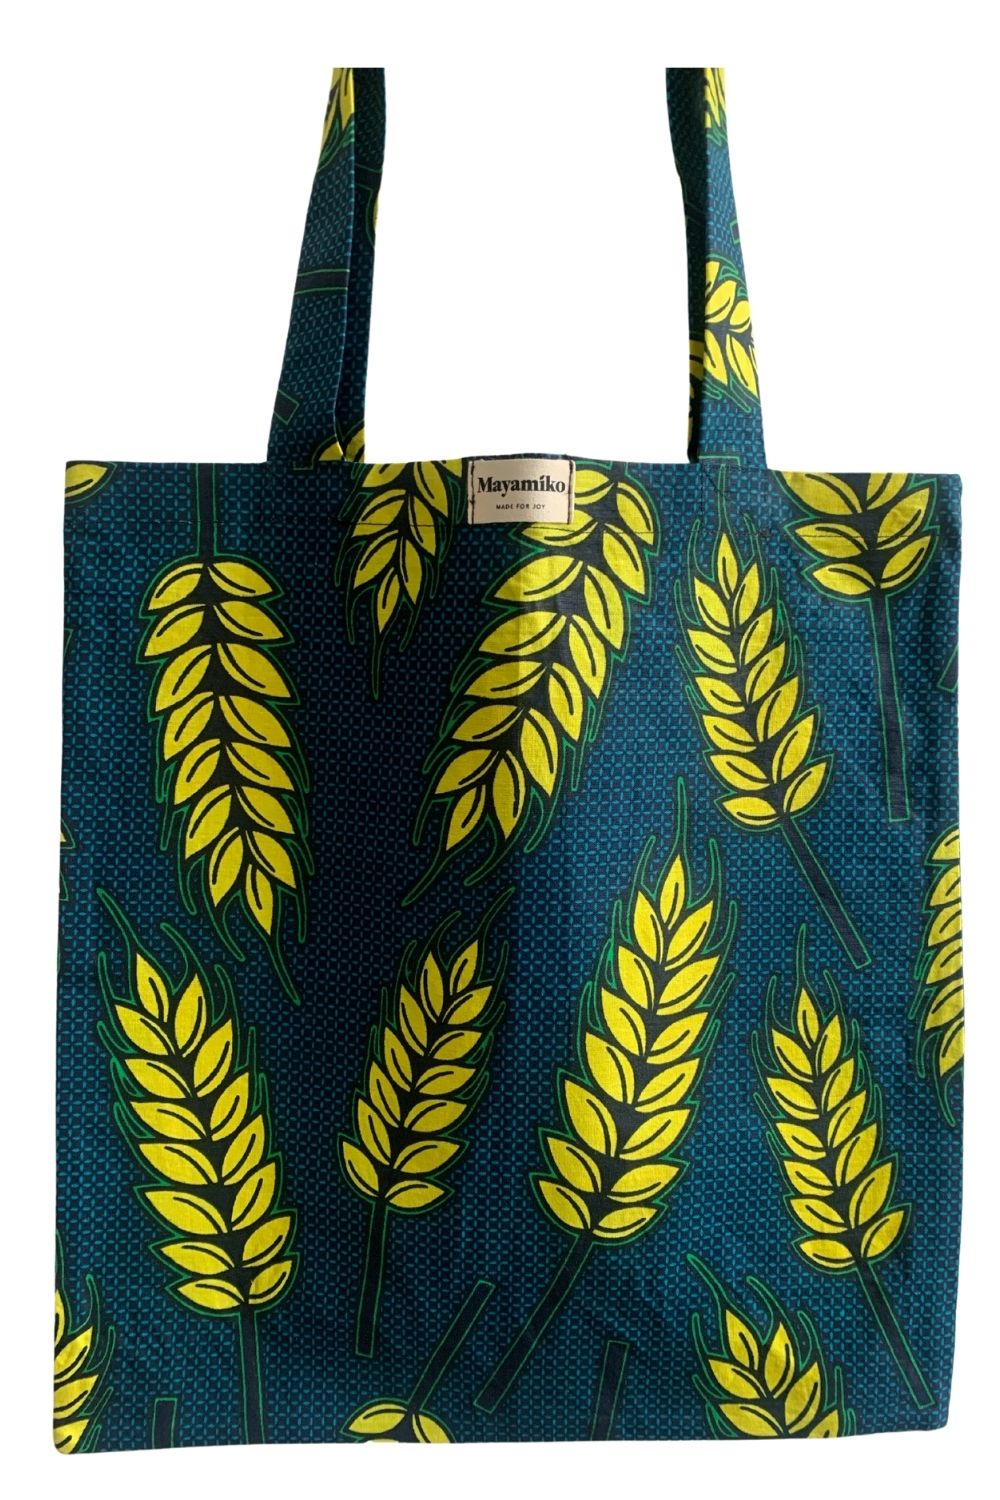 Fabric tote in teal and yellow sprig